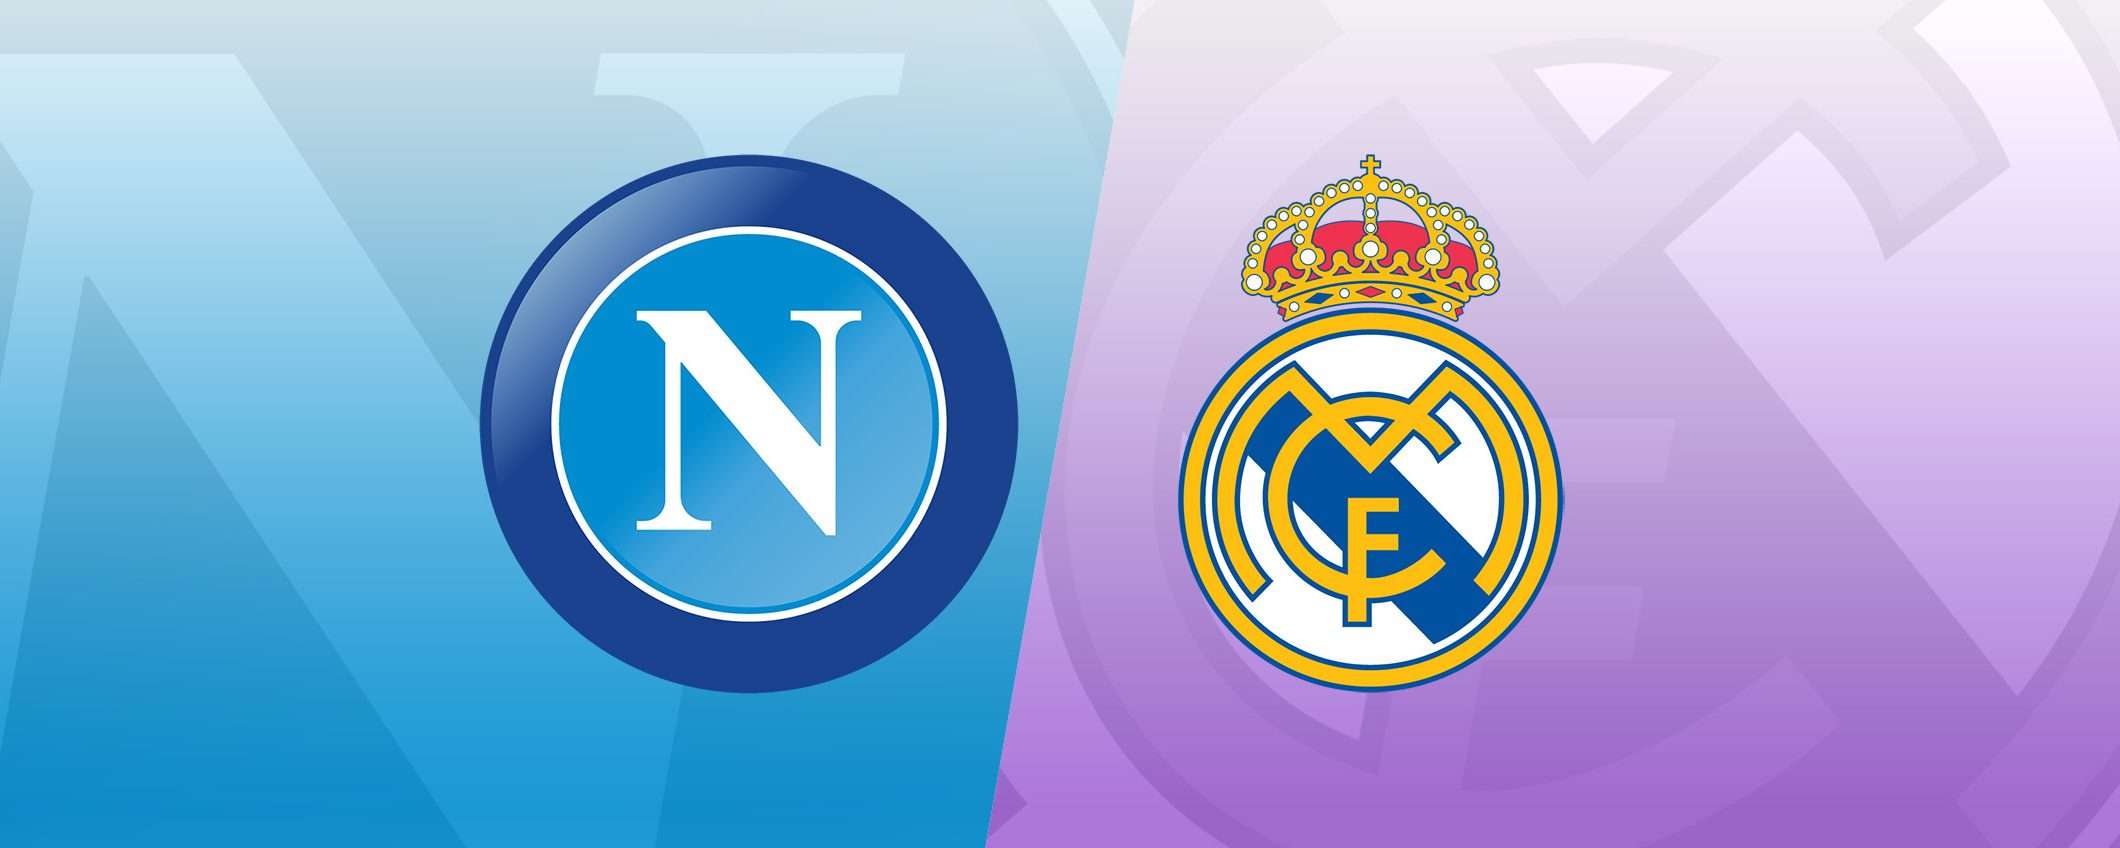 Come vedere Napoli-Real Madrid in streaming (Champions)